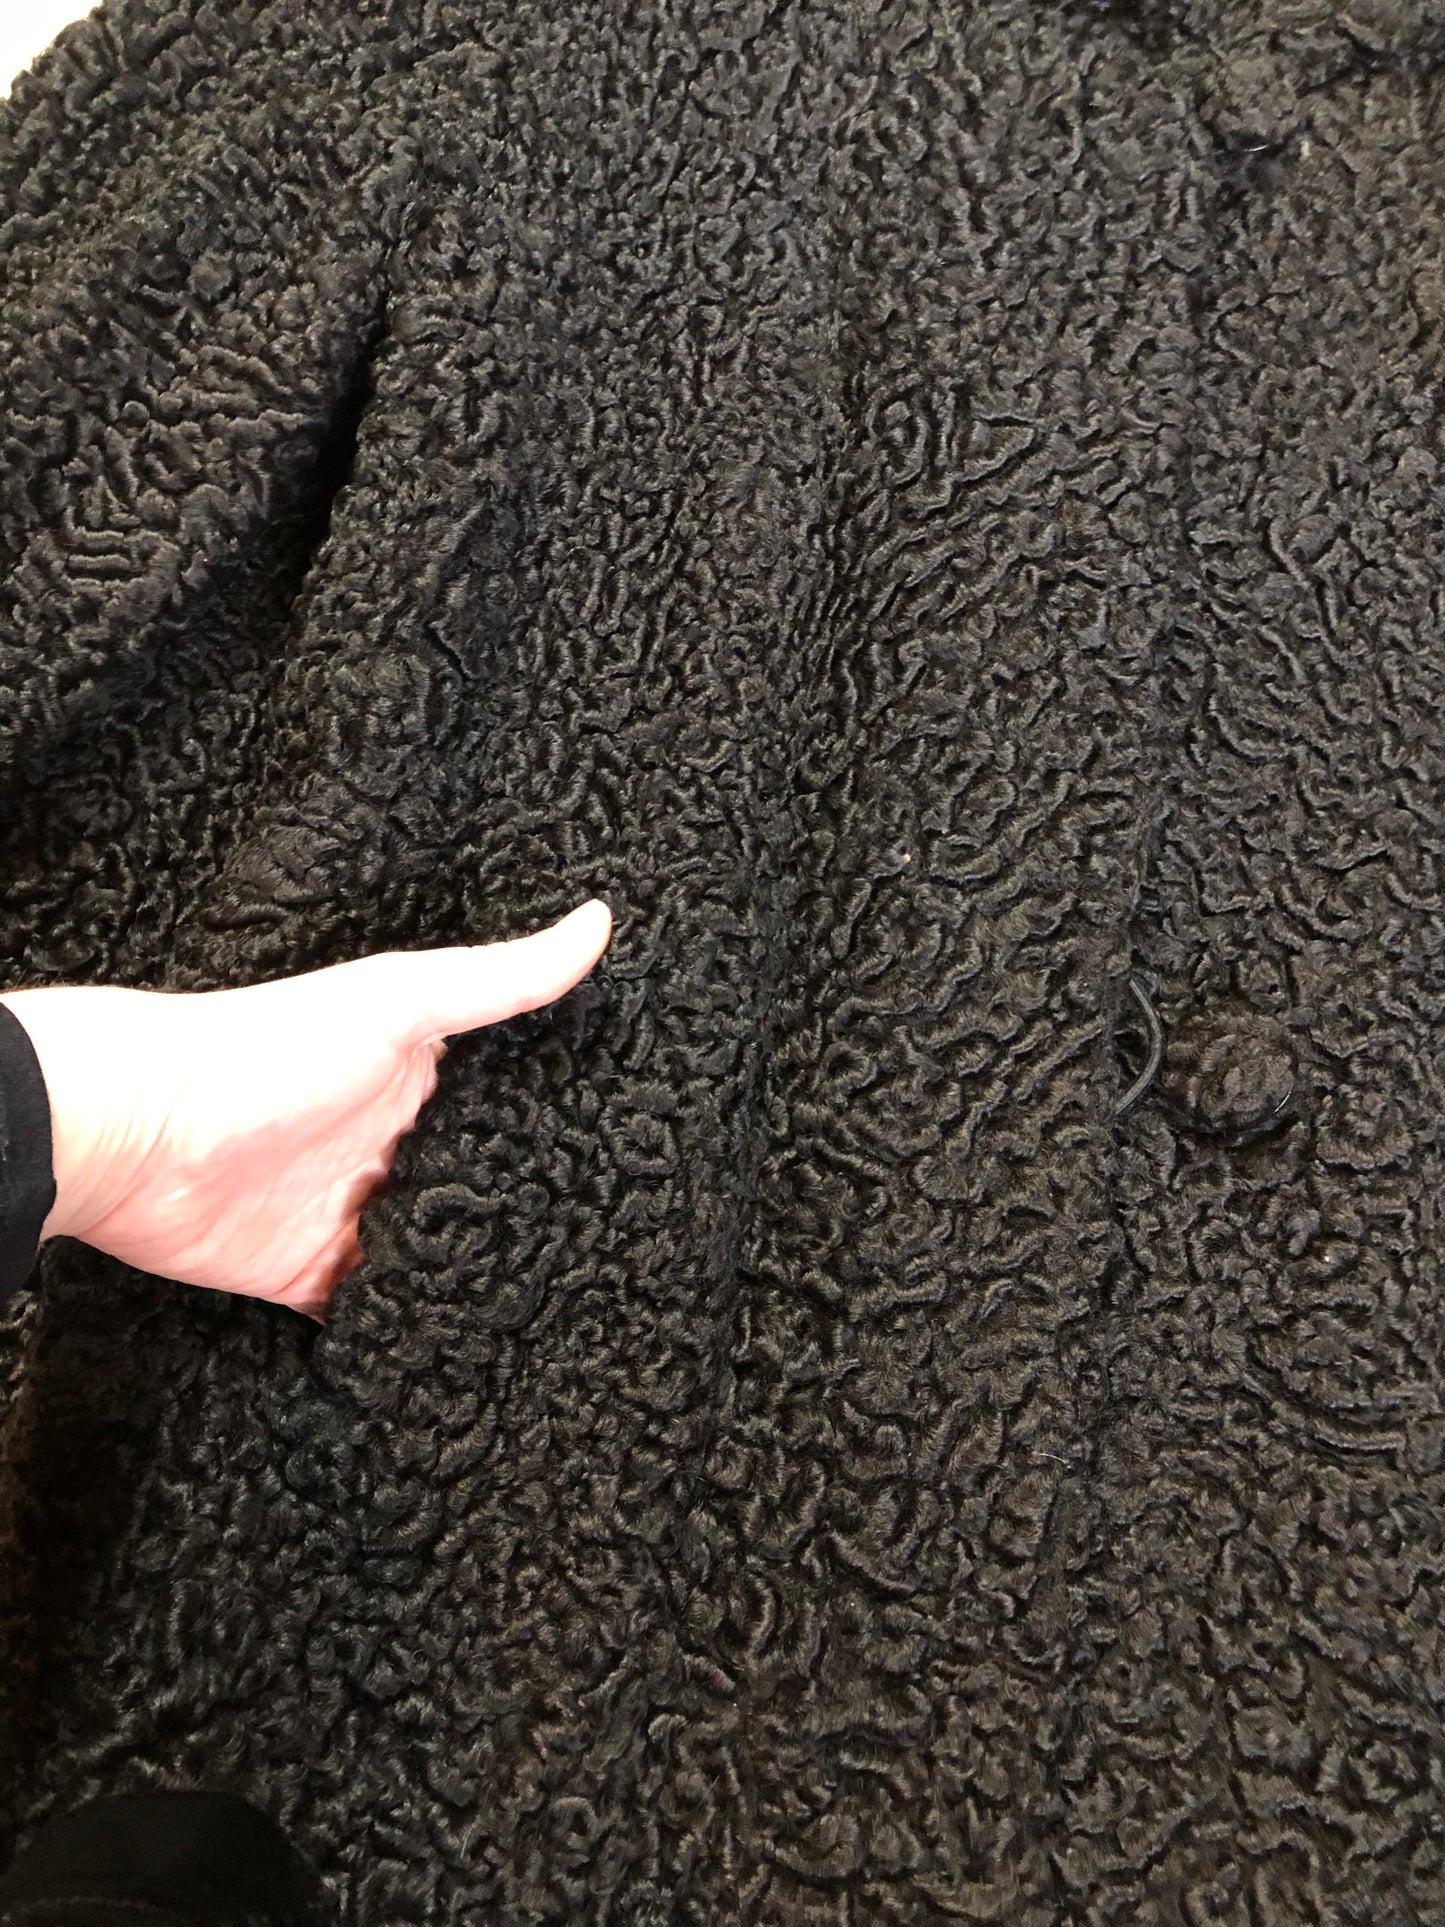 Kingspier Vintage - Vintage Rideau Furs black persian wool coat with wool buttons, pockets and black satin lining with delicate flower motif. Made in Nova Scotia. Size small/ medium.